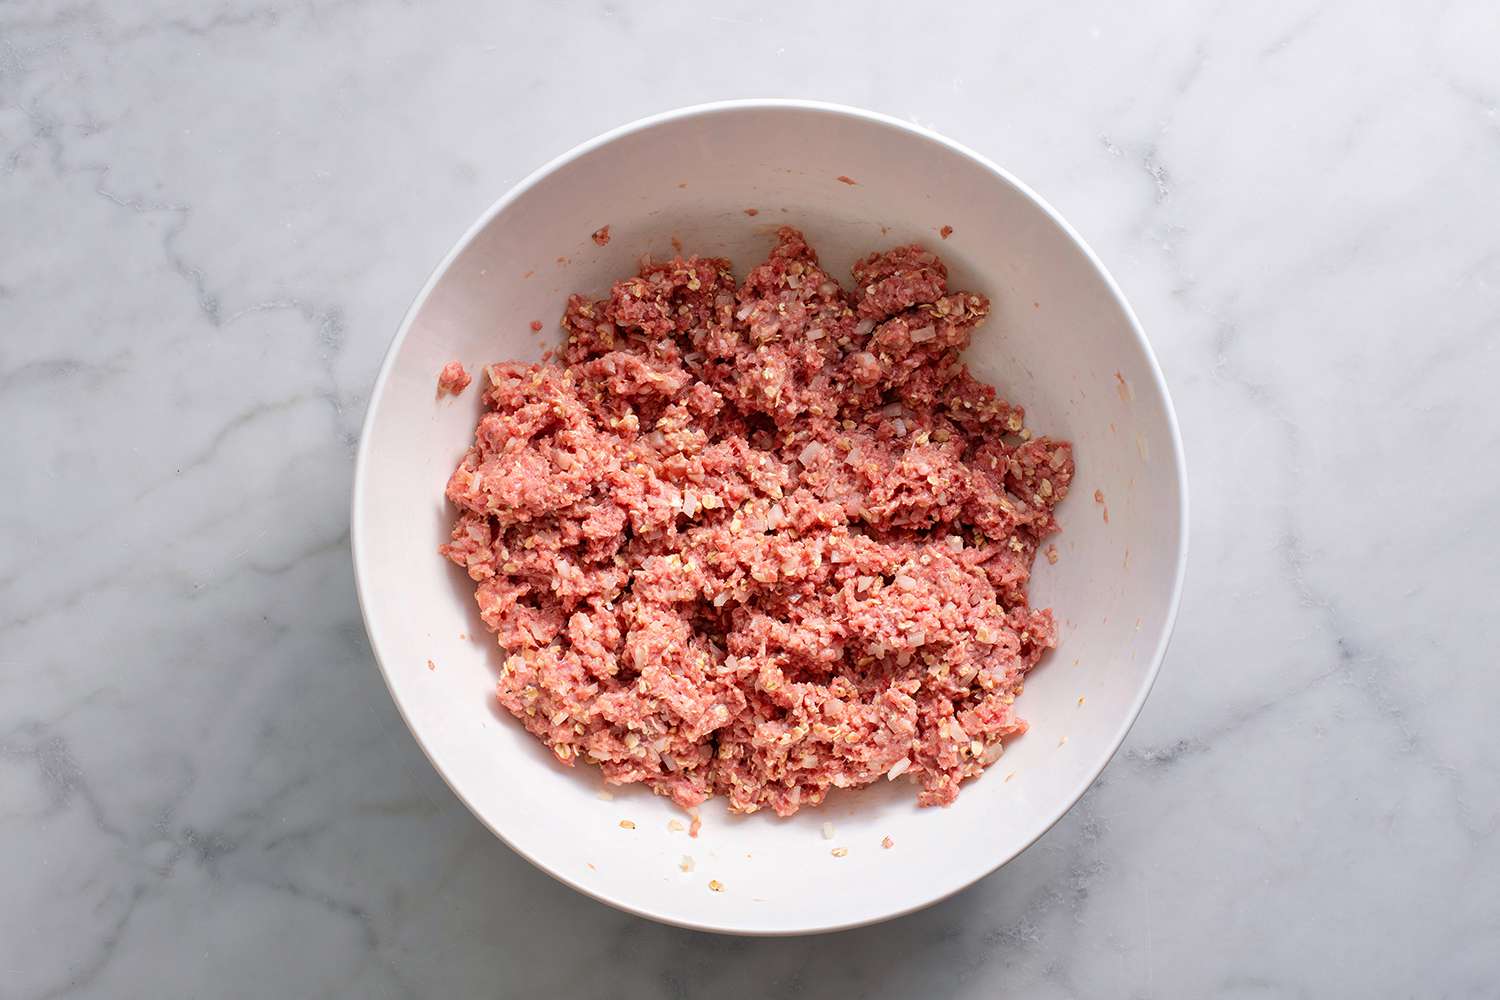 Ground beef, oats, onion, milk, eggs, and seasonings mixed in a large bowl